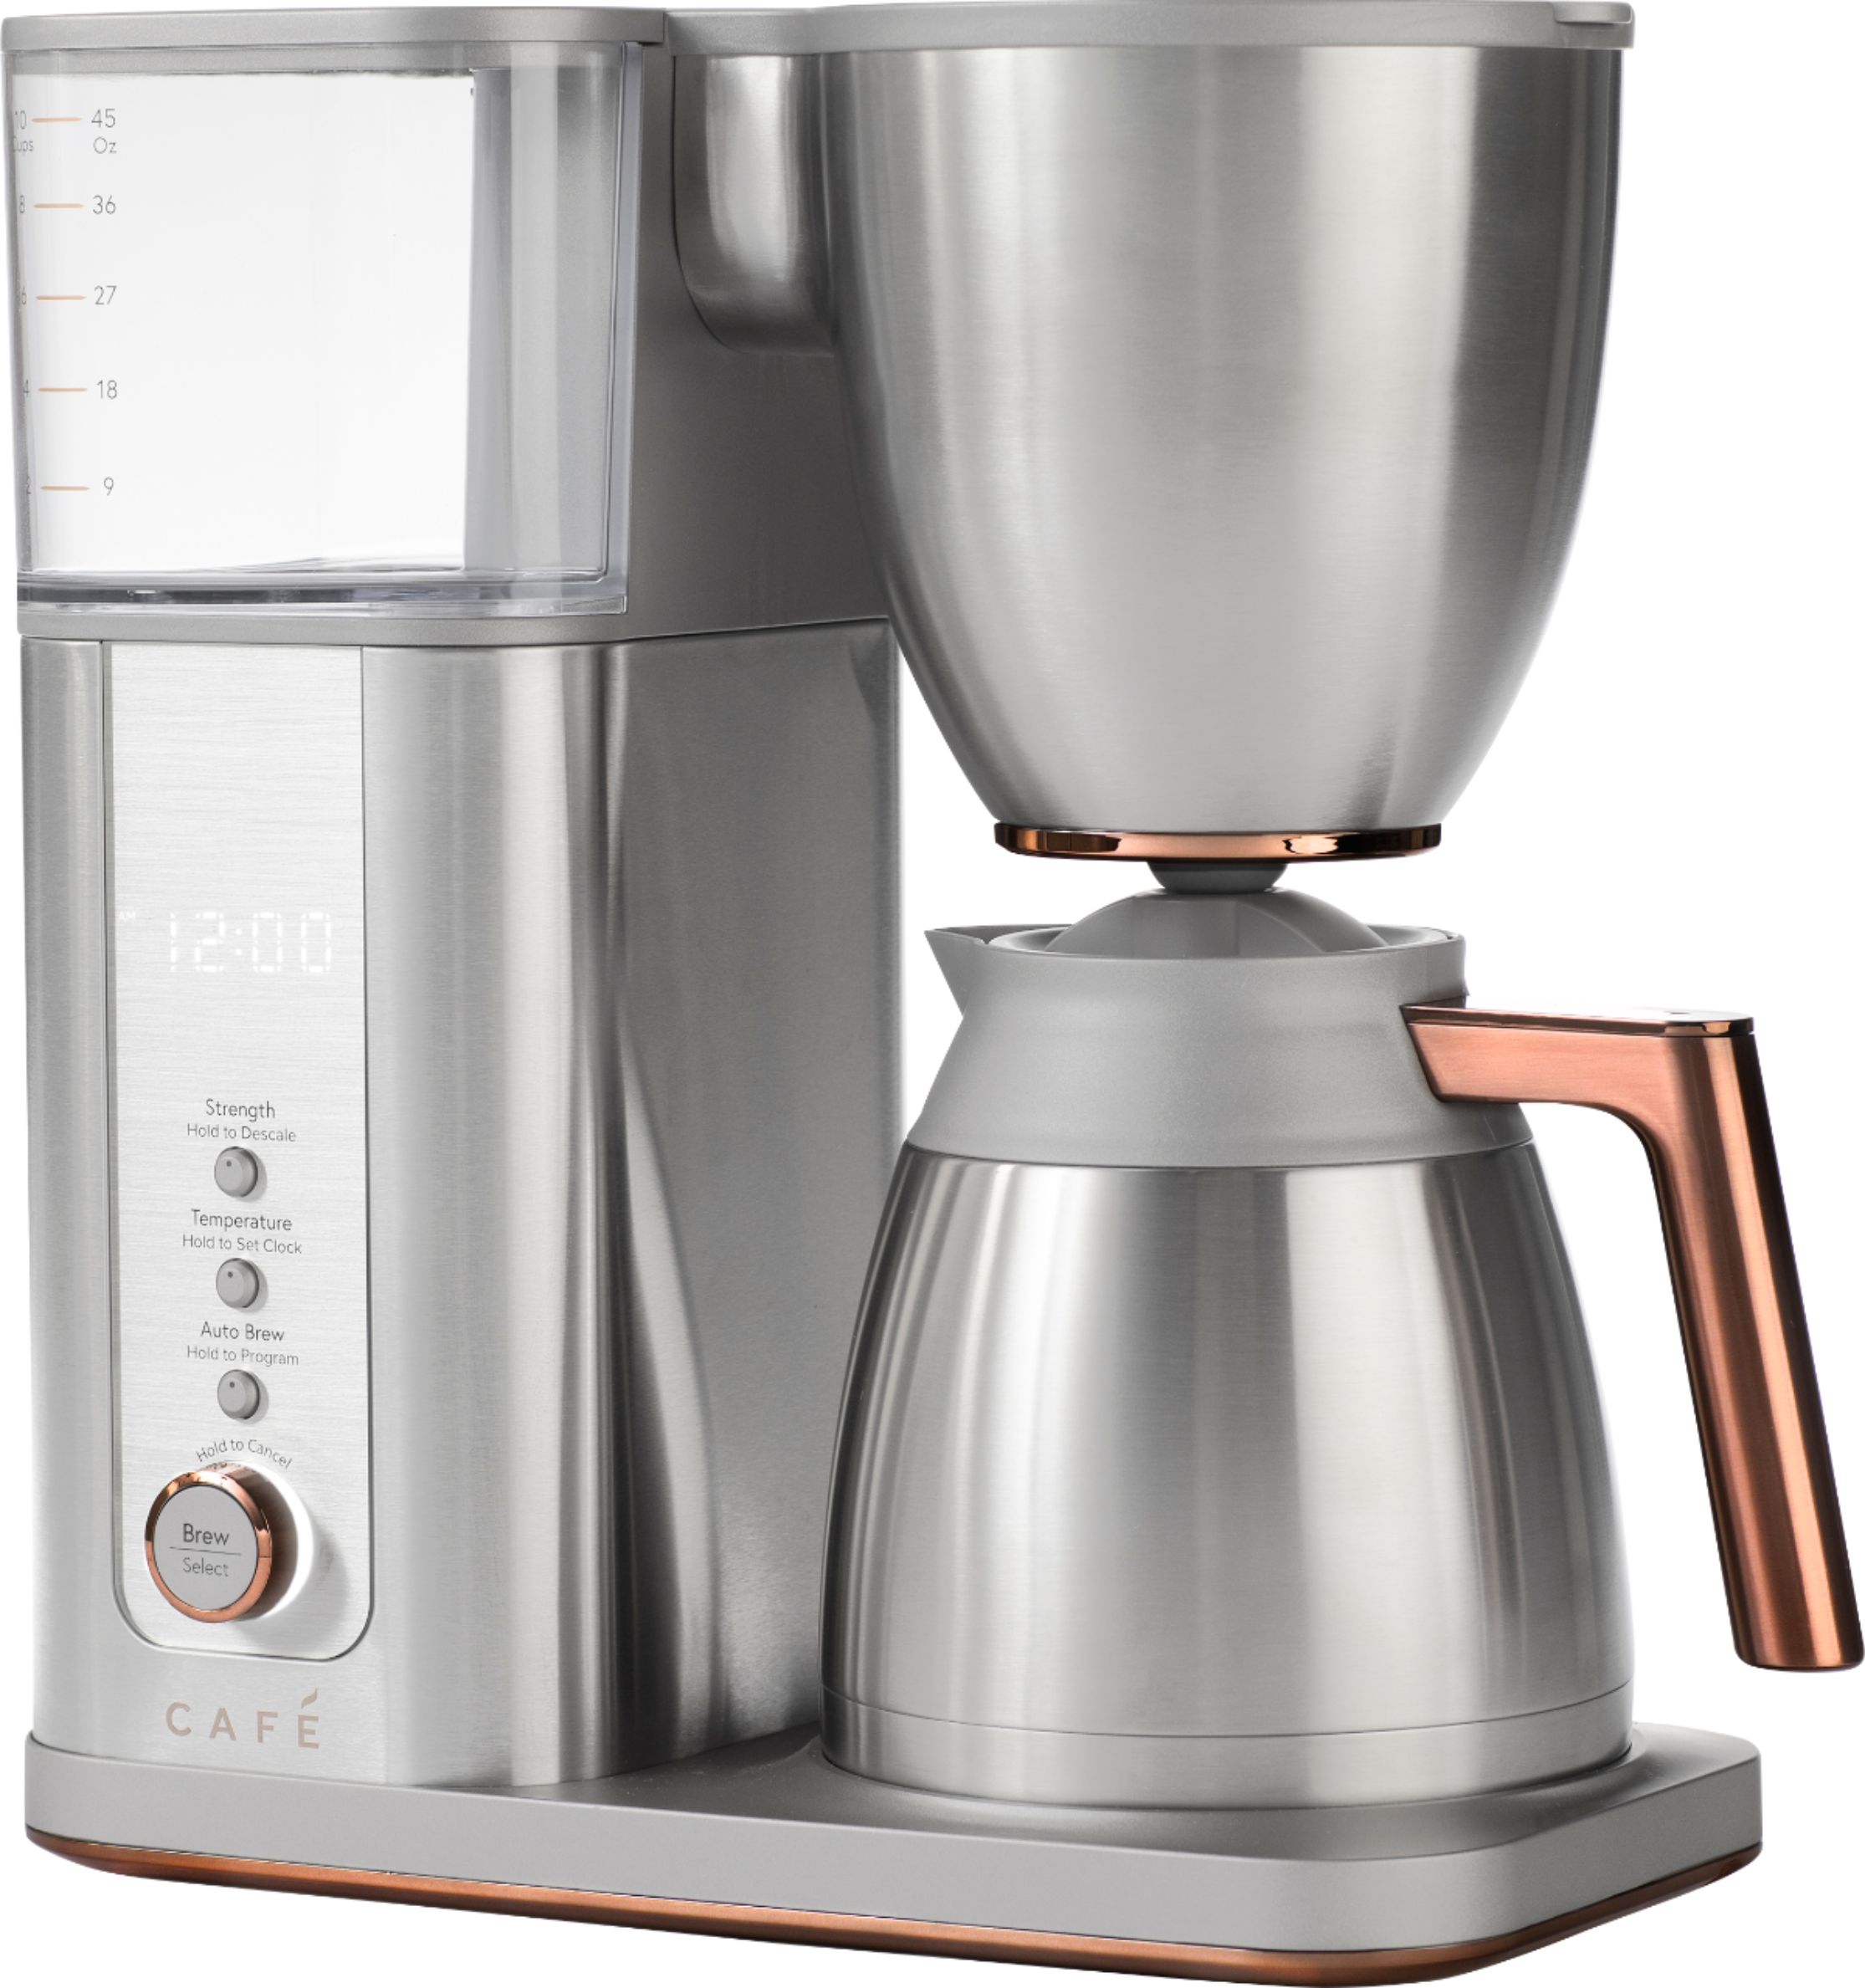 Angle View: Café - Smart Drip 10-Cup Coffee Maker with WiFi - Brushed Stainless Steel